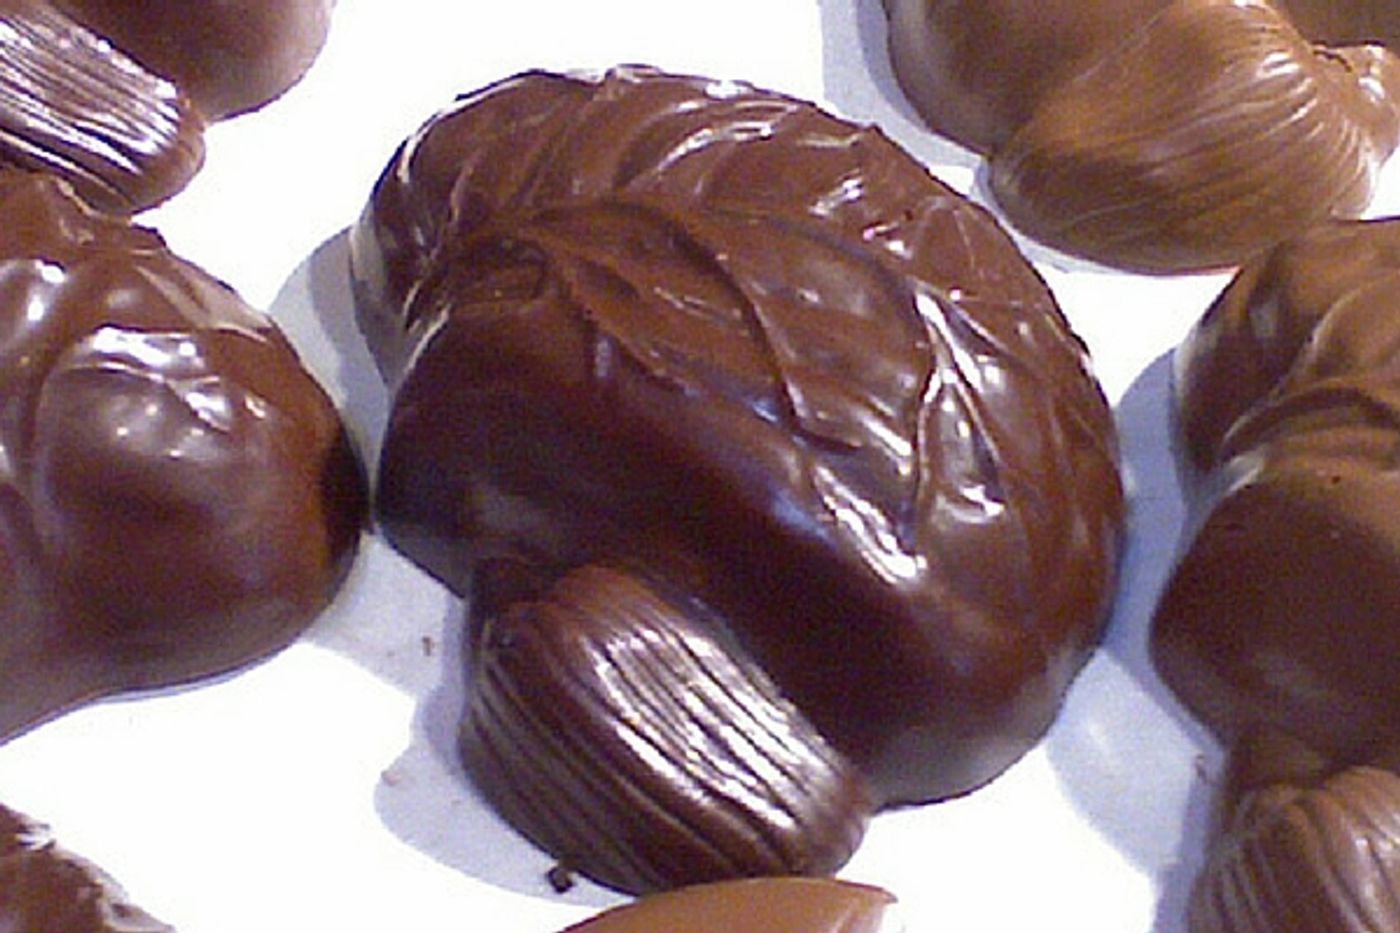 Chocolate lovers show better cognition